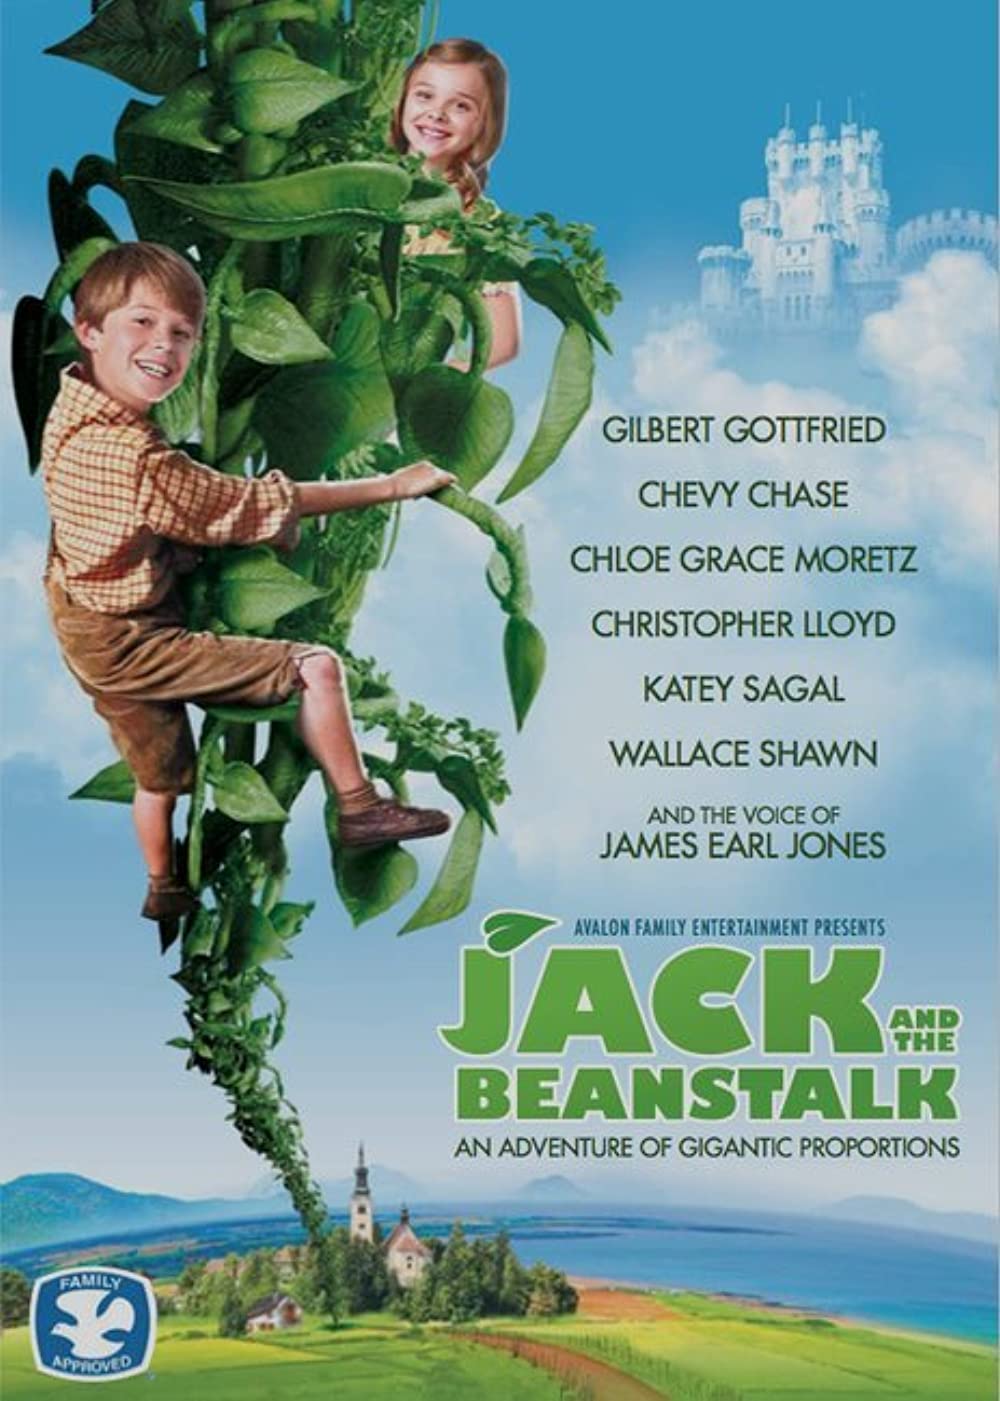 Download Jack and the Beanstalk Movie | Jack And The Beanstalk Full Movie